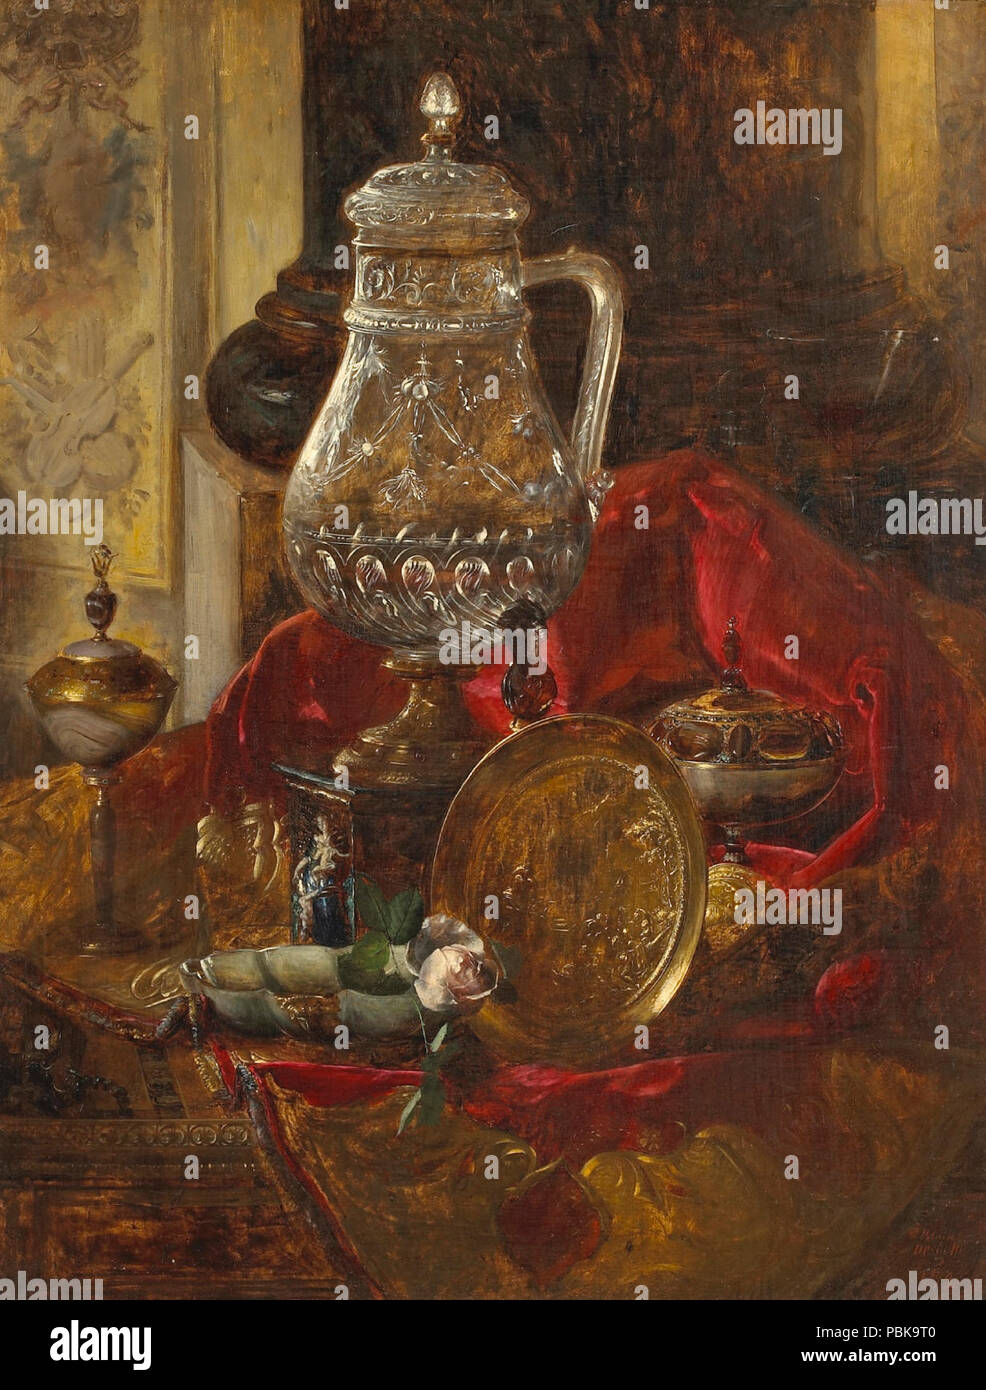 A-still-life-with-a-crystal-tankard-and-other-precious-objects-arranged-on-a-draped-cloth. Stock Photo